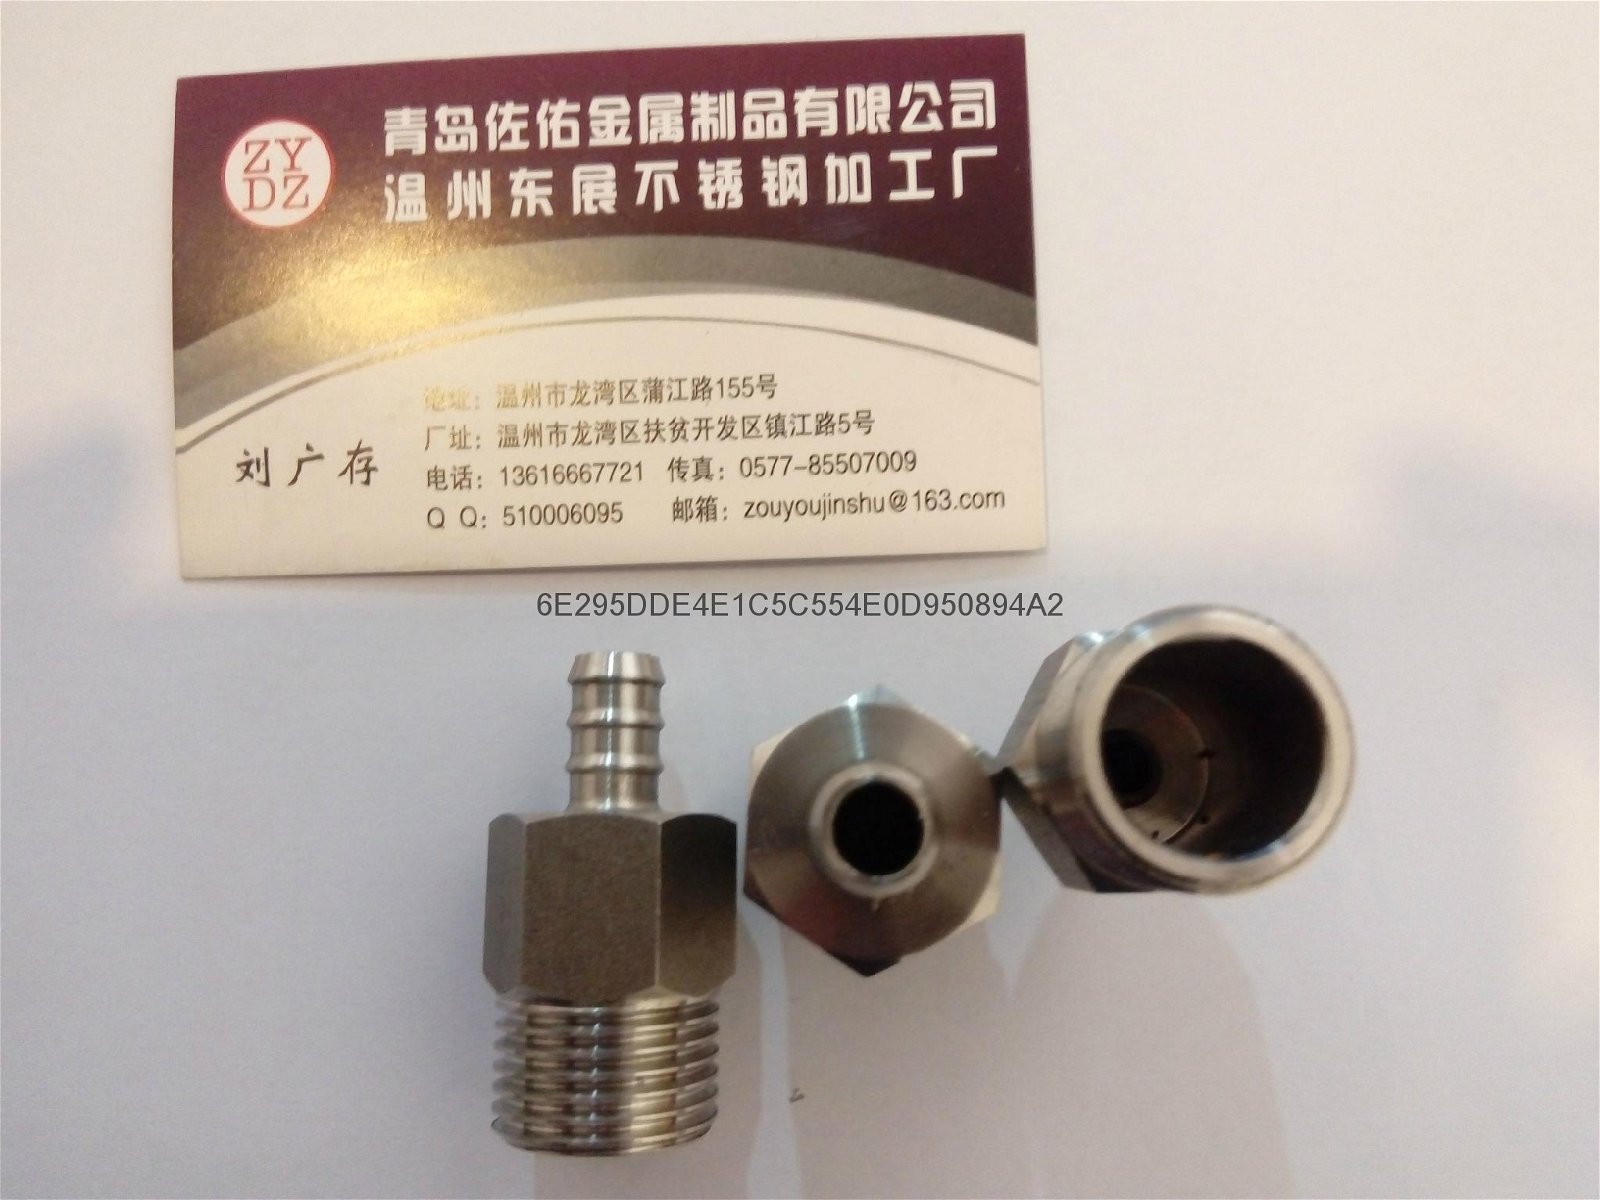 Stainless steel sanitary fittings water heater hose connector  2